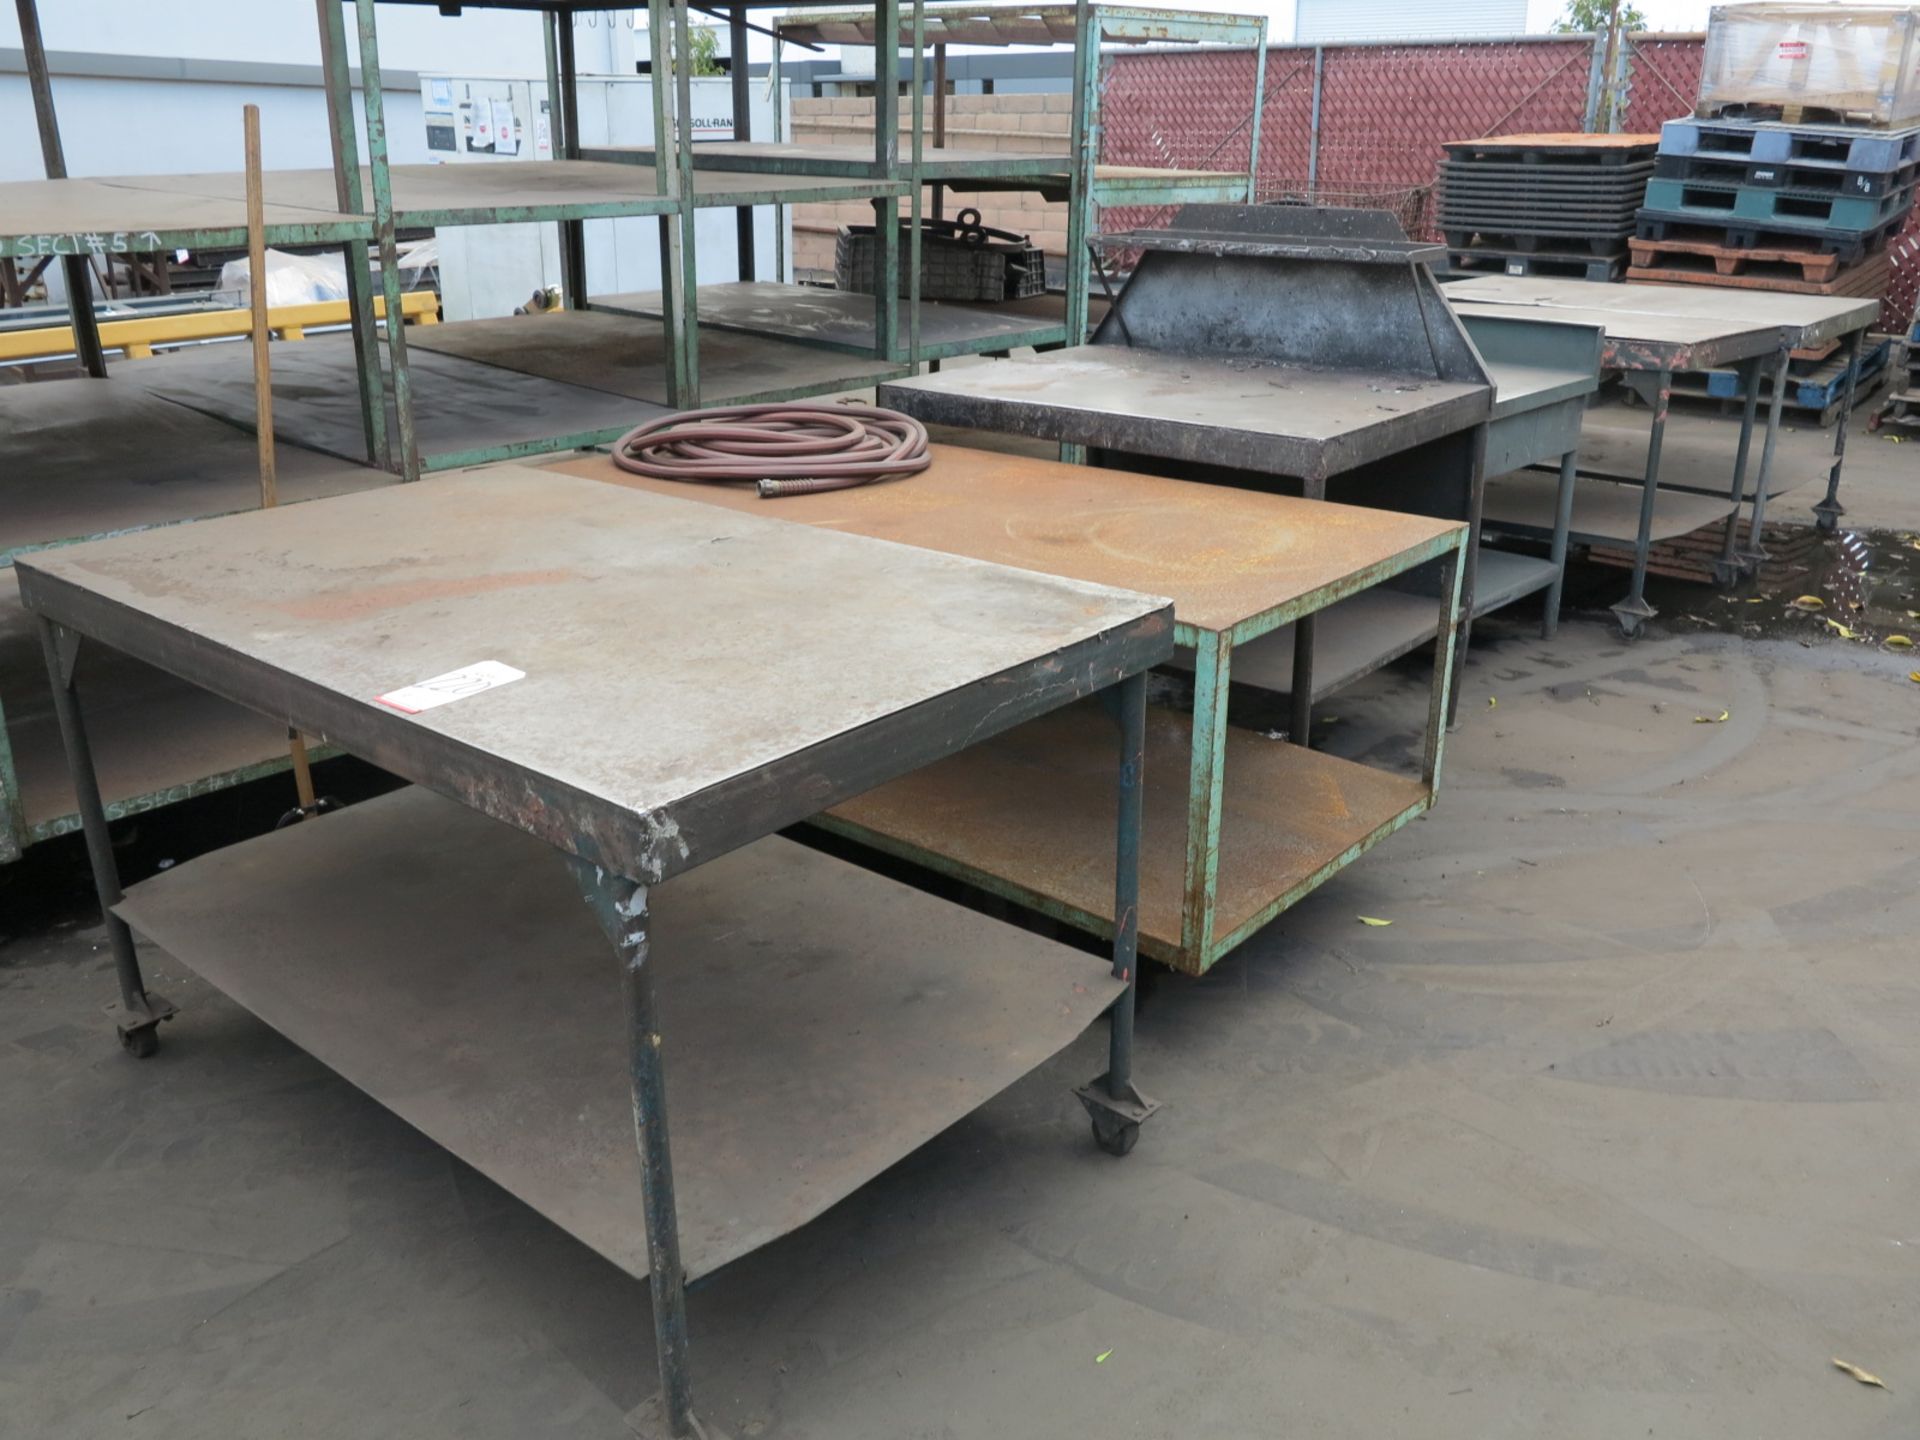 LOT - (4) STEEL SHOP CARTS AND (2) STEEL BENCHES